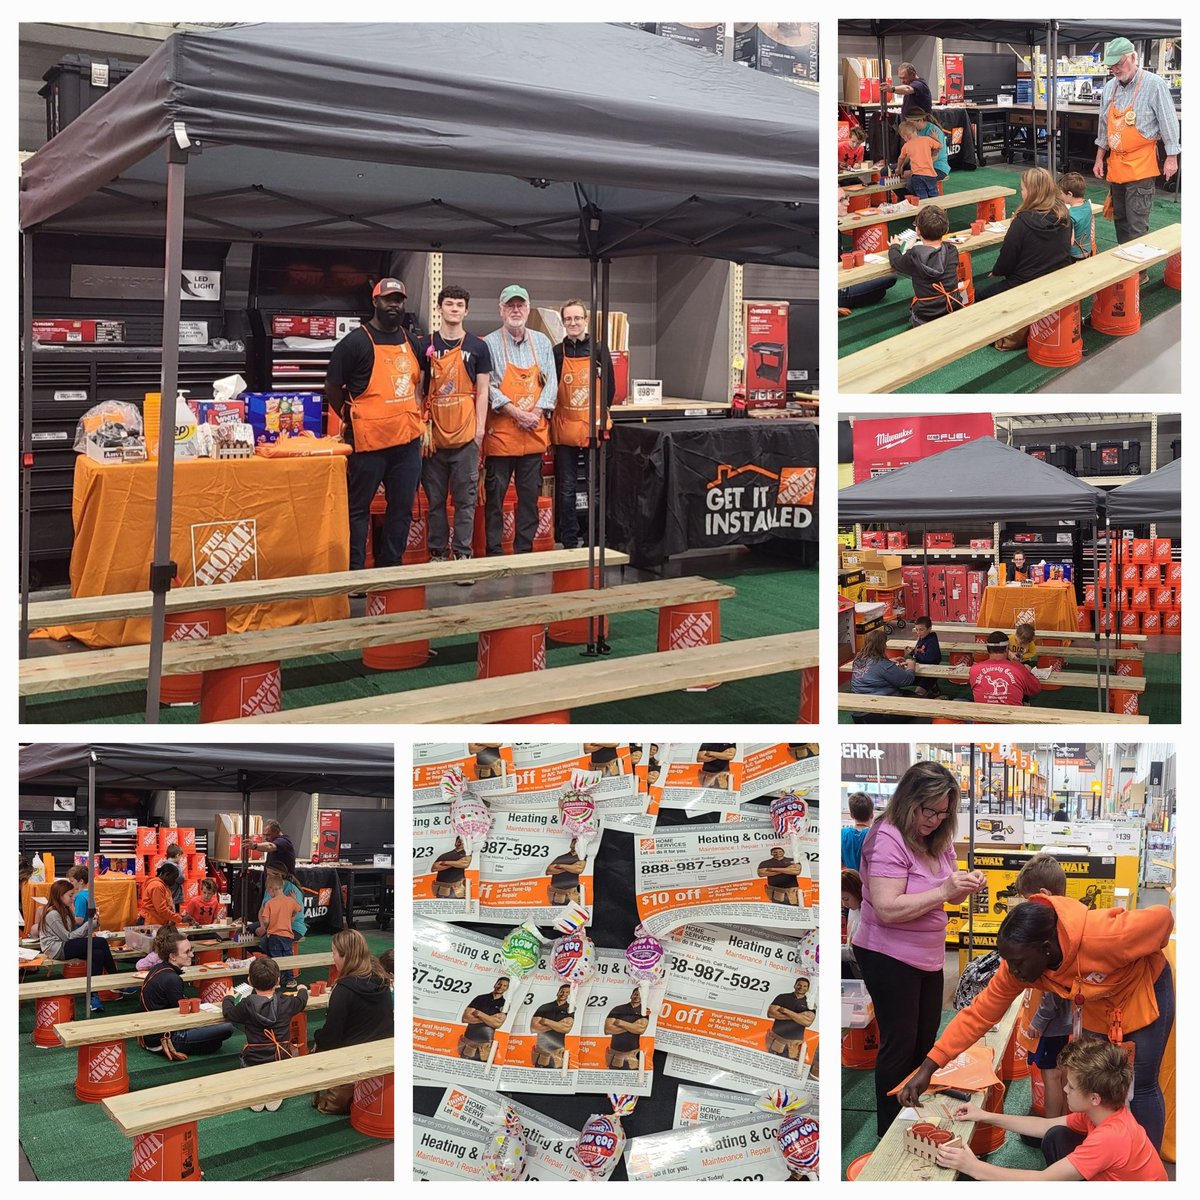 Rain 🌧 didn't stop🛑 us today, Kids Workshop is Back with Spring Fever Events! Thank You to our New Pro Supervisor Jen, & our Kids Workshop Team, Chris, Joseph, India &'Ken the Lead Man.' #OneTeamOneDream @HillaryHyatt @kmn293 @THDHynes